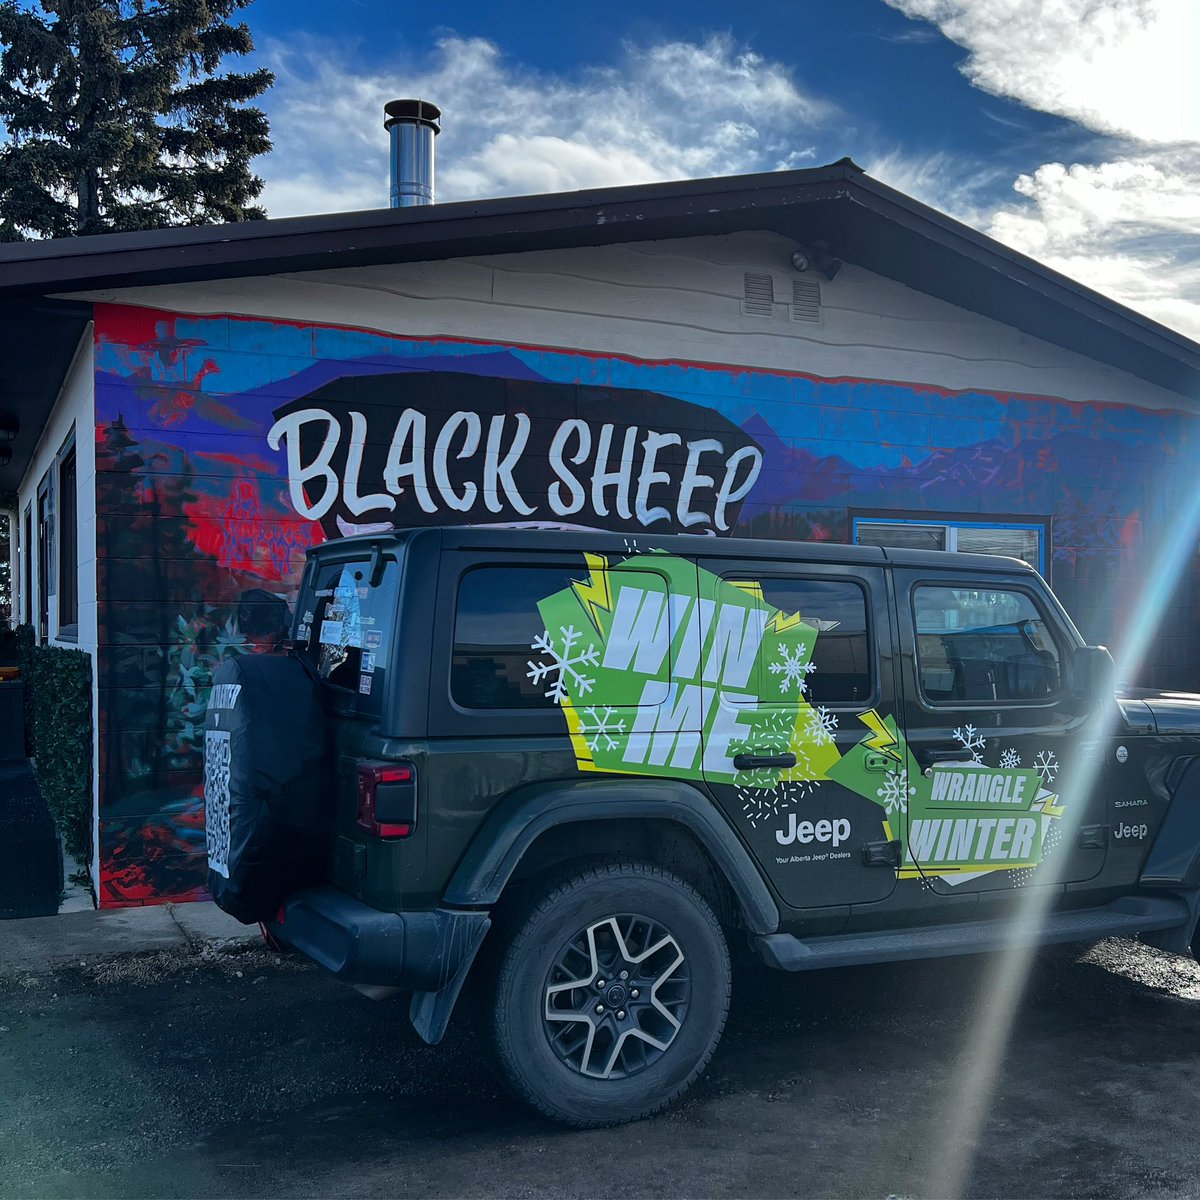 The Green Jeep of the family 🤭
#blacksheep #coffee #diamondvalley 
☕️🚘🐑☕️🚘🐑☕️🚘🐑☕️🚘🐑☕️🚘🐑☕️🚘🐑☕️
#alberta #jeep #giveaway #entertowin #explorealberta #jeepnation